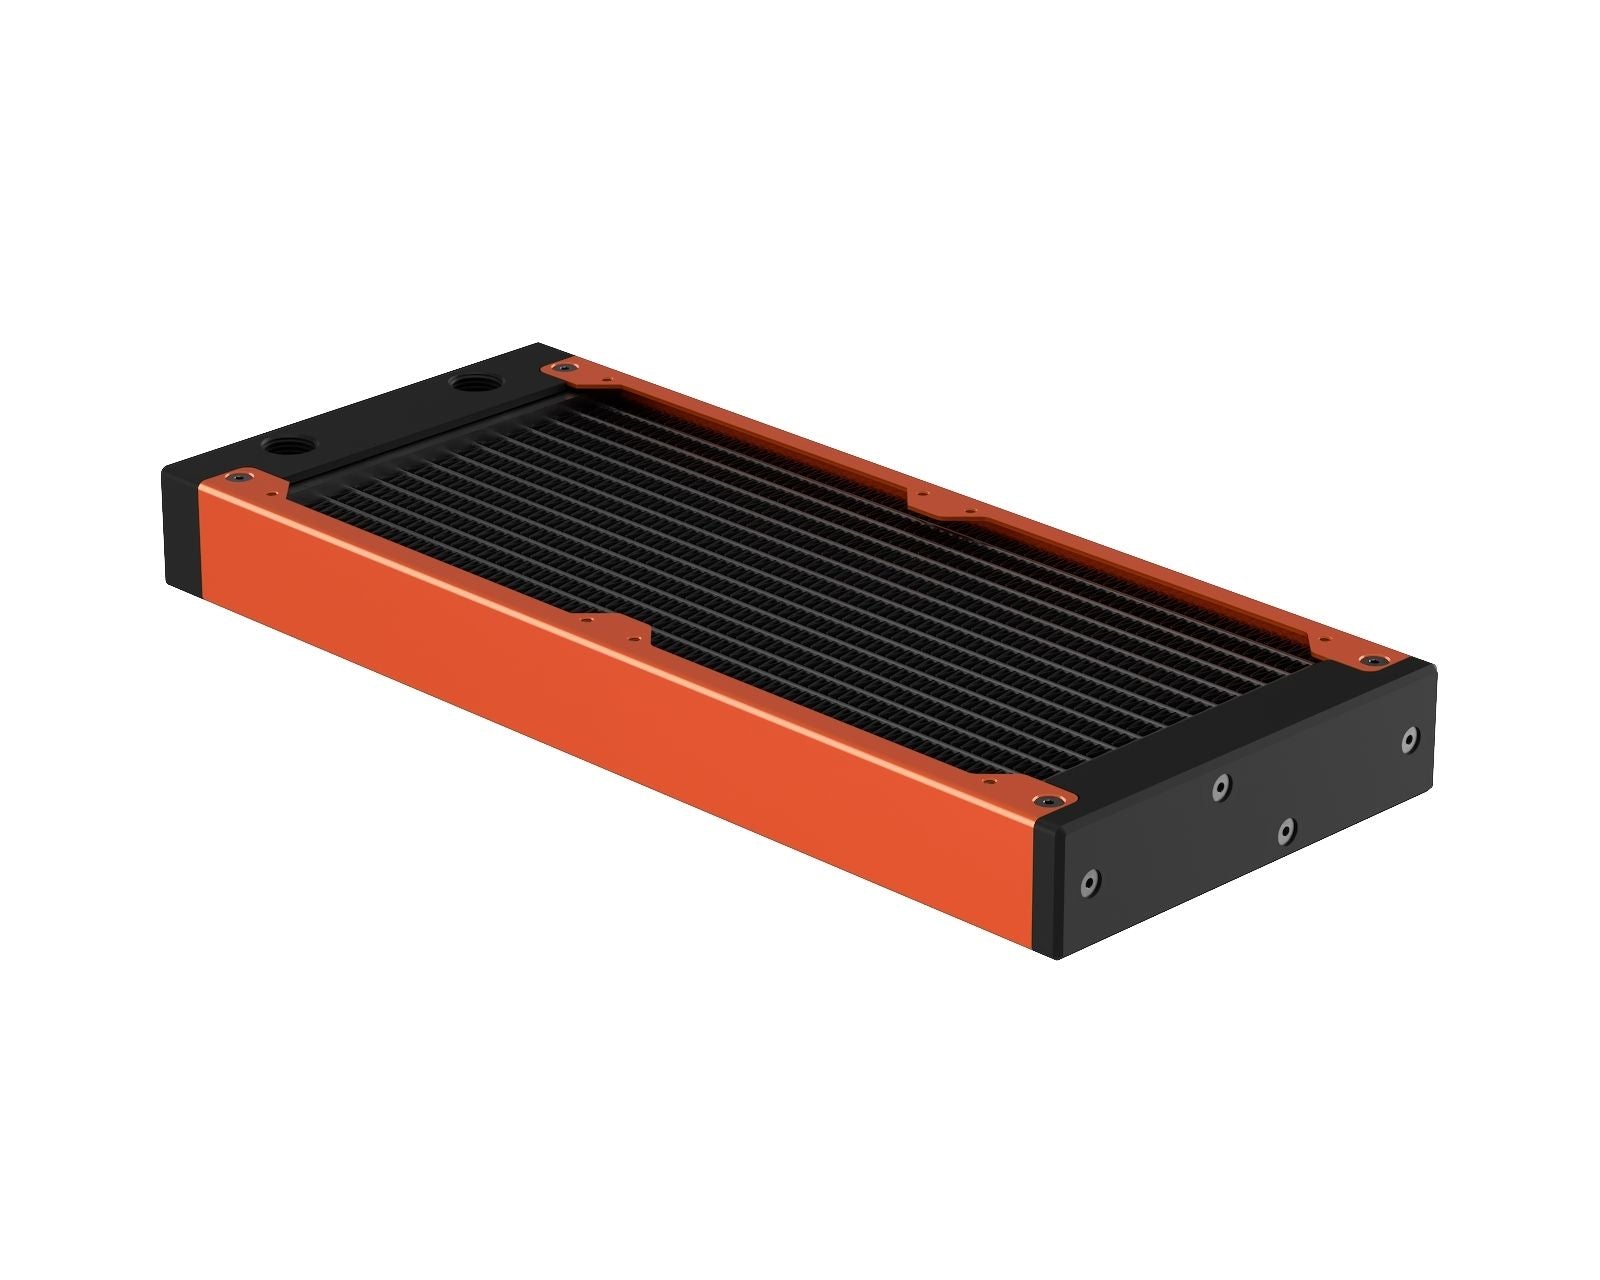 PrimoChill 240SL (30mm) EXIMO Modular Radiator, Black POM, 2x120mm, Dual Fan (R-SL-BK24) Available in 20+ Colors, Assembled in USA and Custom Watercooling Loop Ready - Candy Copper